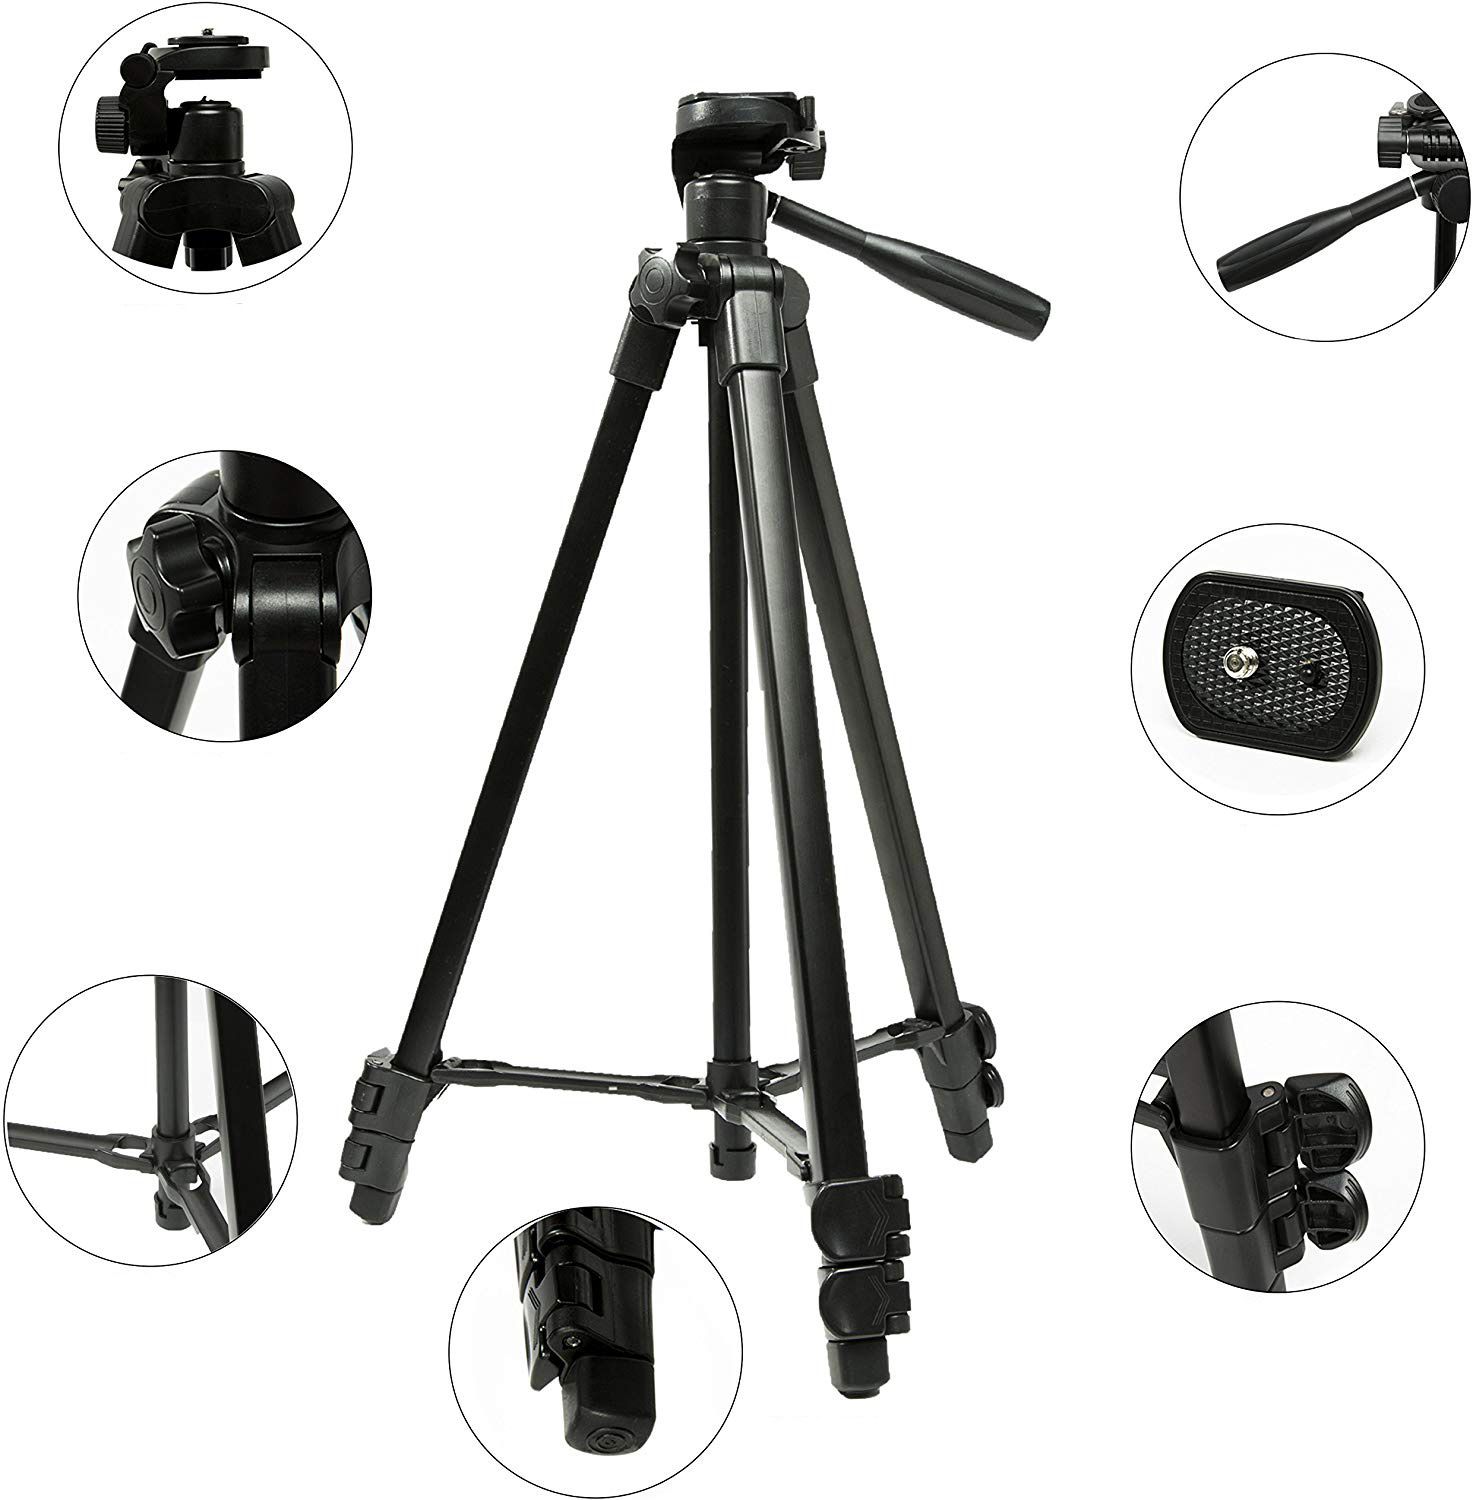 100BTF-BY268-Aluminum-Alloy-Foldable-41CM-130CM-Tripod-with-Ball-Head-for-DSLR-Sport-Camera-Smarphon-1576402